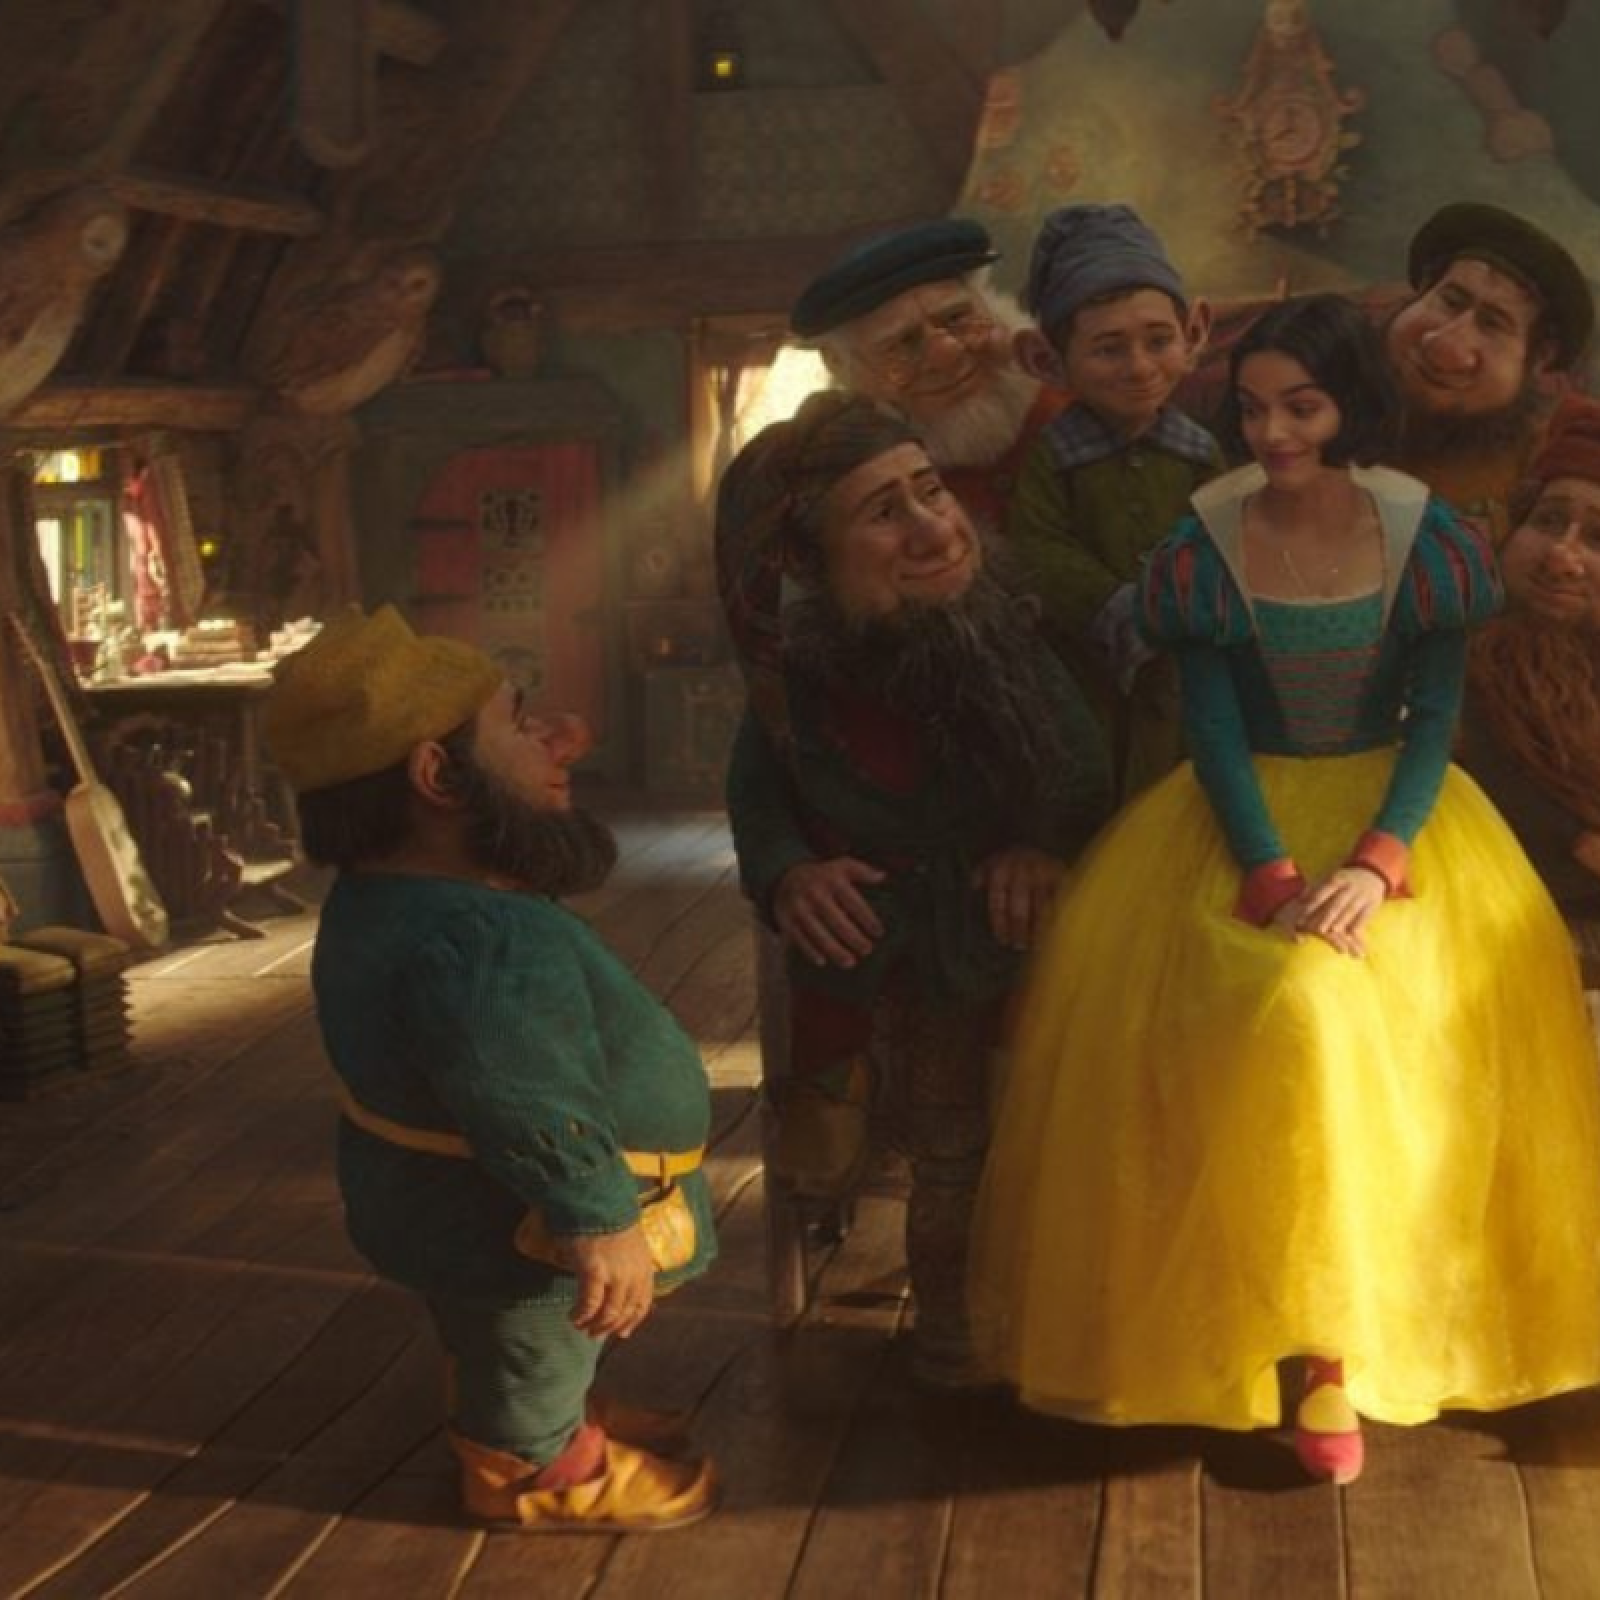 Snow White': Everything We Know so Far About Disney's Live-Action